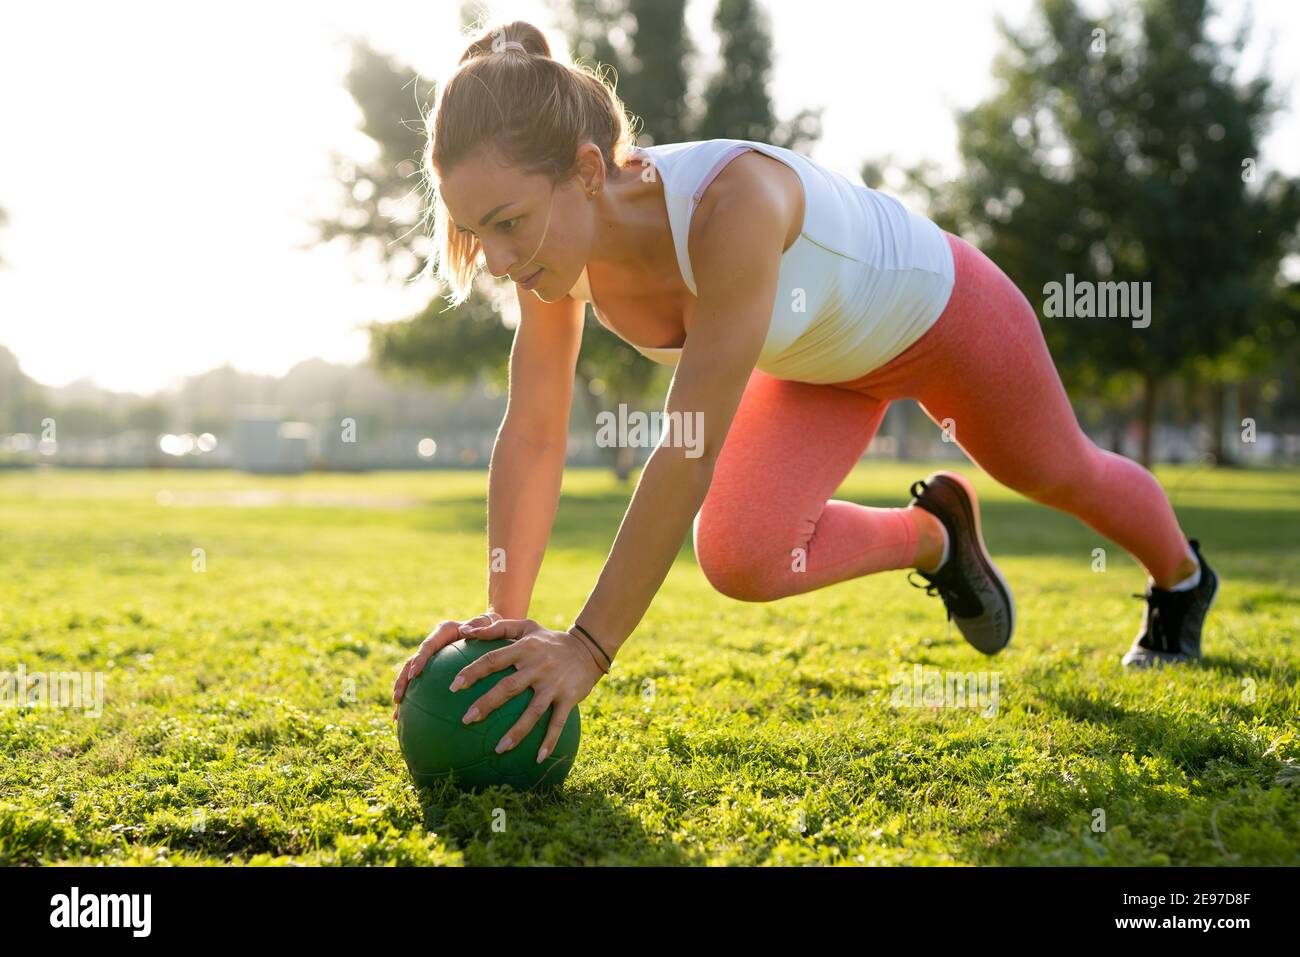 A youthful woman engages in exercises amidst the greenery of the park ...